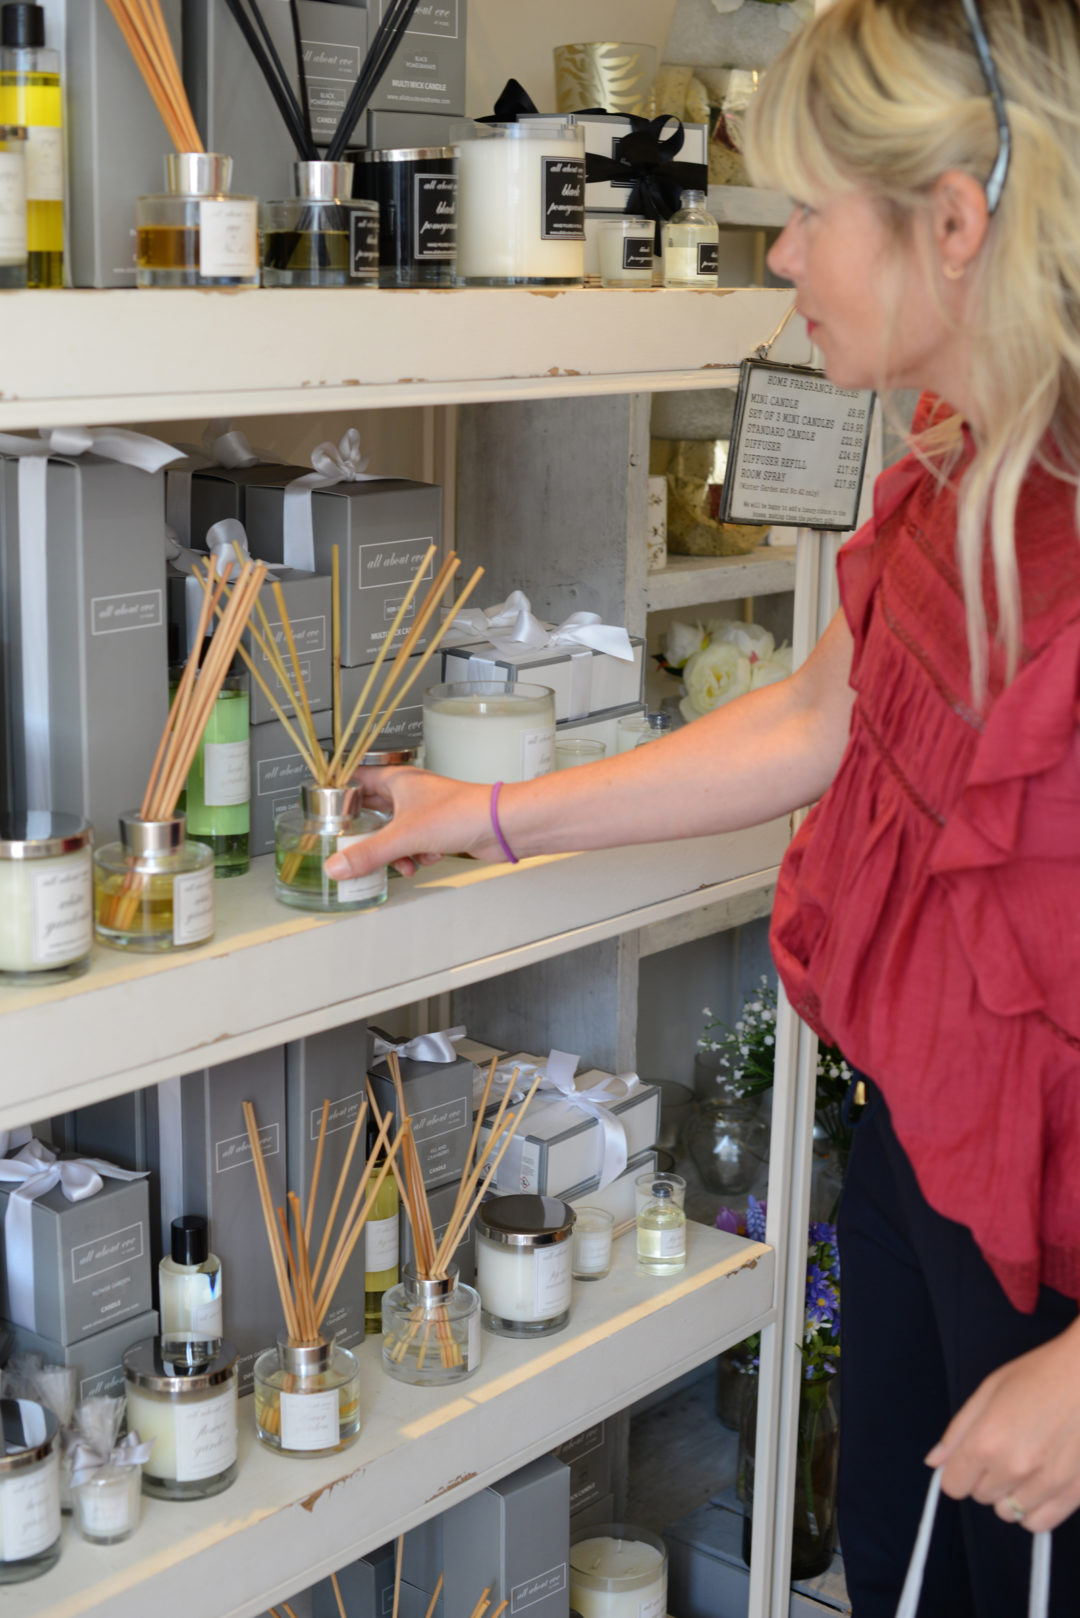 reigate-shopping-guide-notesfromastylist